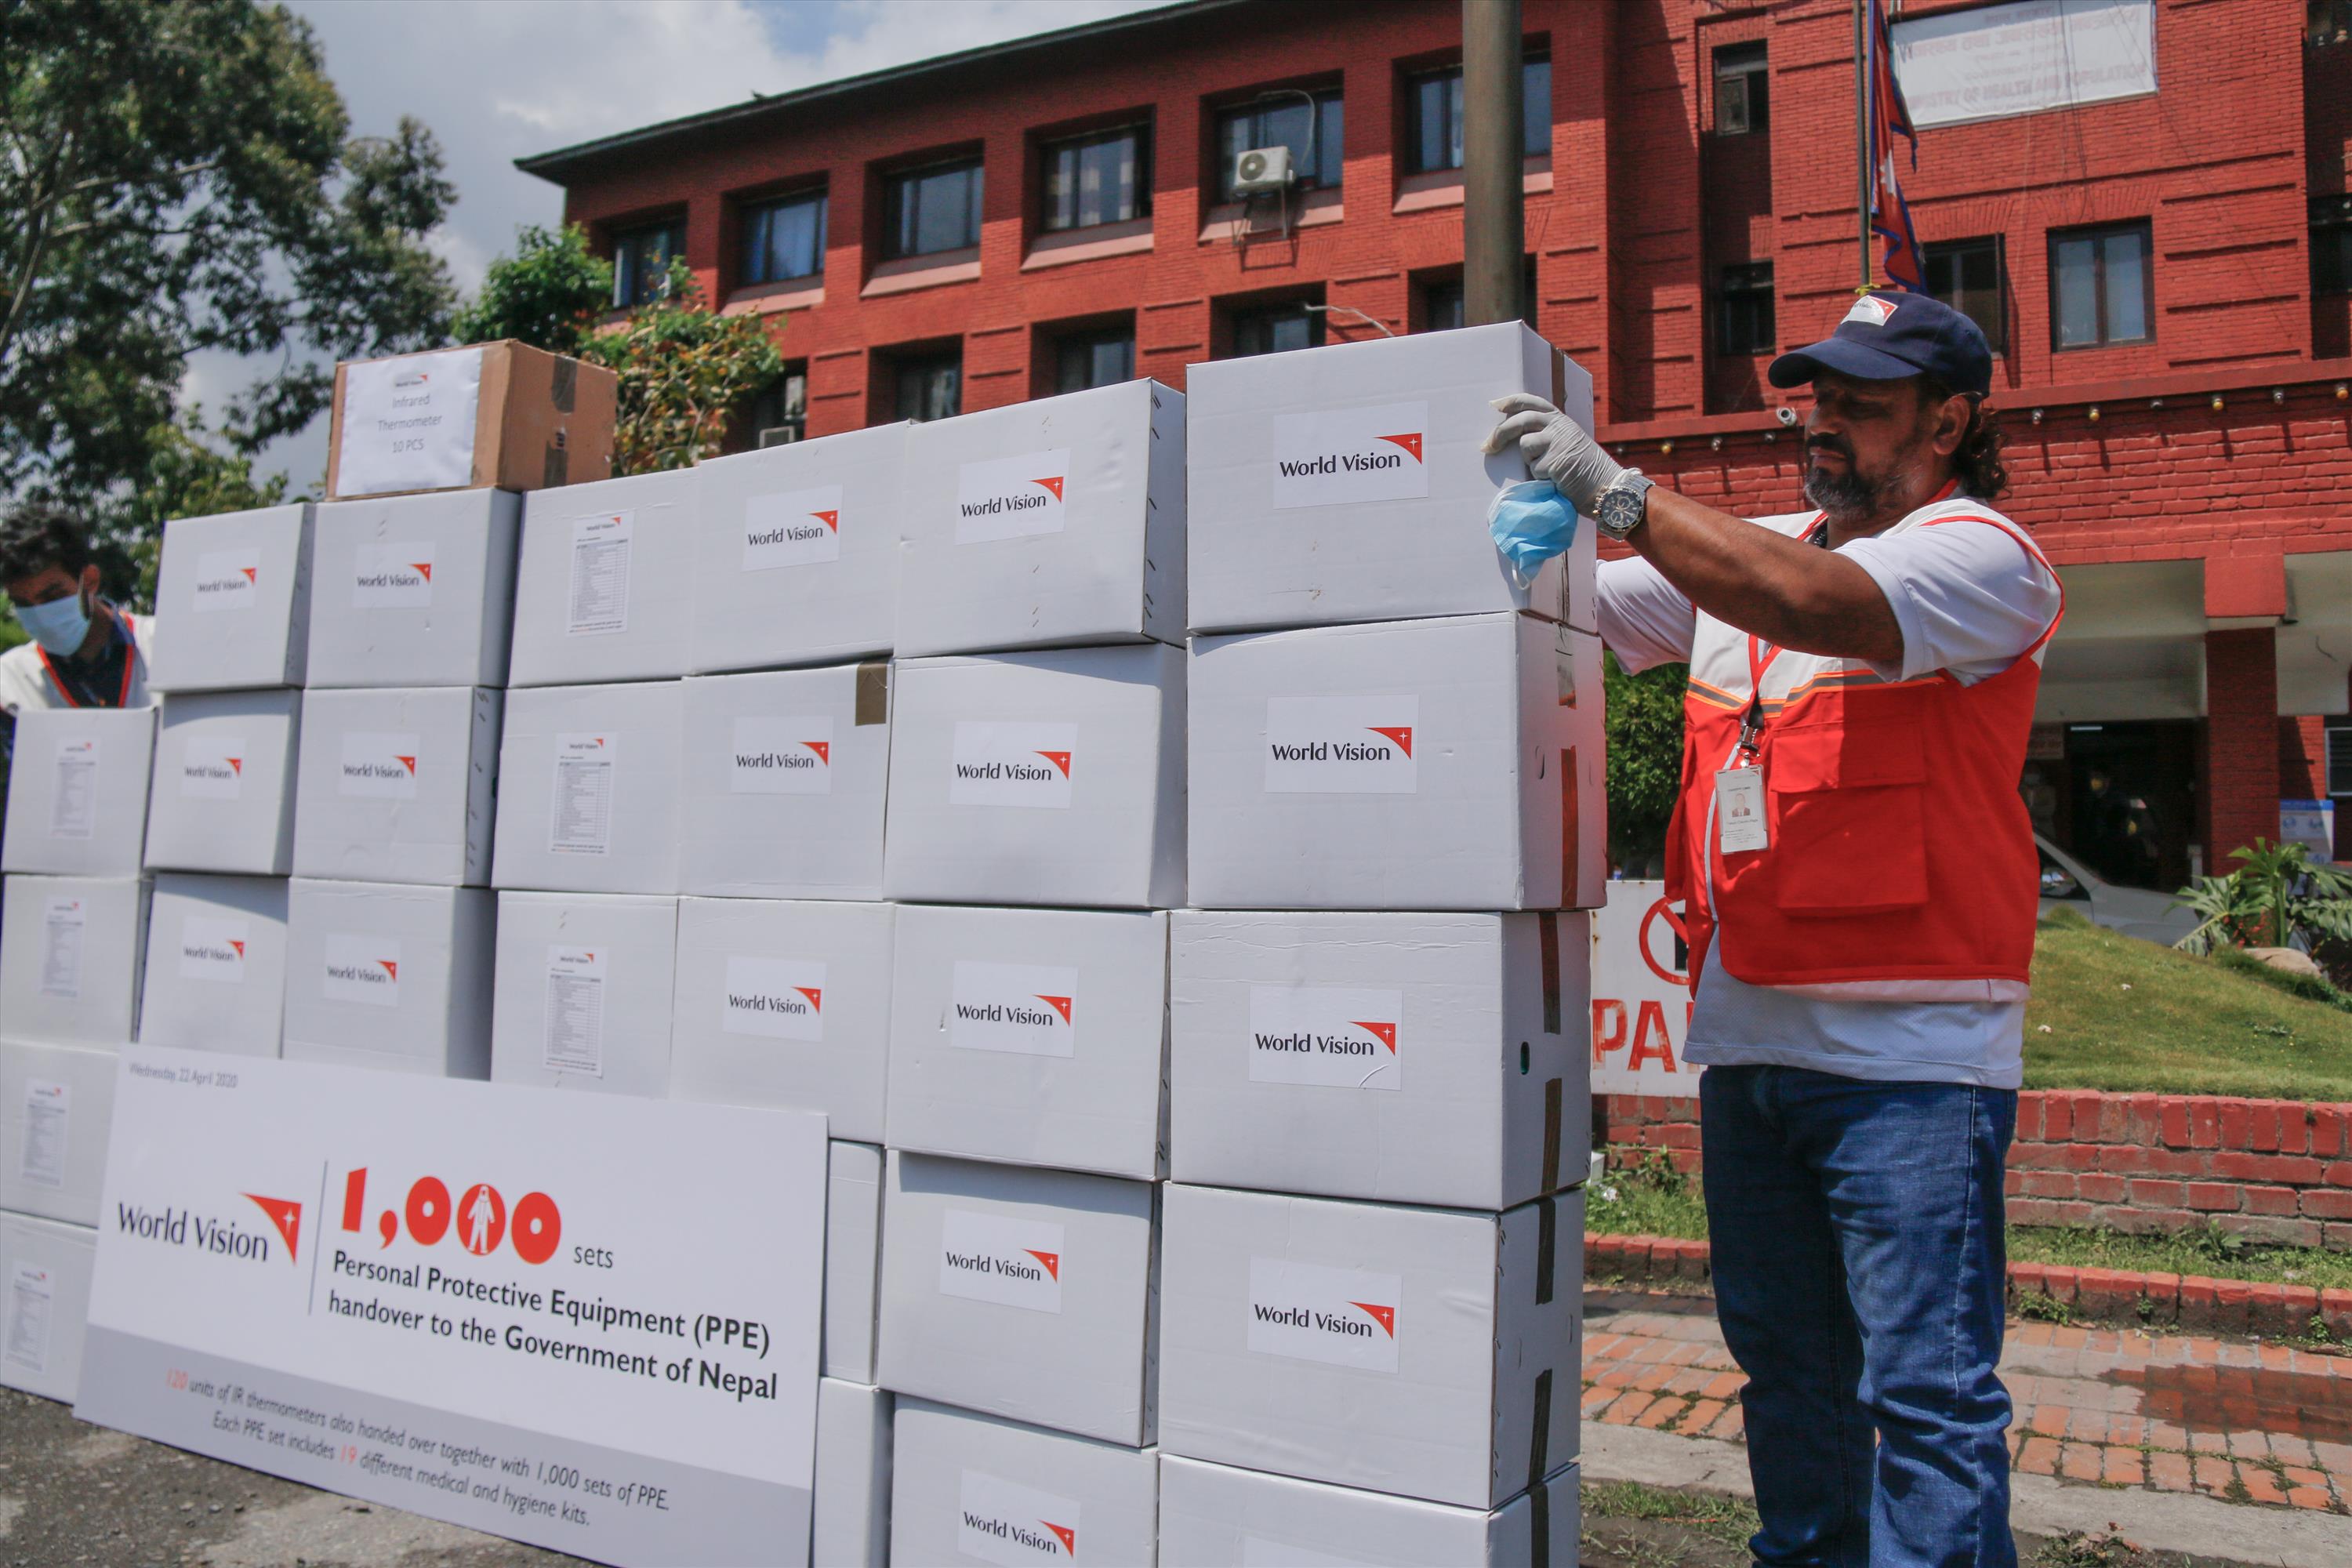 World Vision International Nepal supported 1,000 Personal Protective Equipment (PPE) and 120 IR thermometers to the Government of Nepal